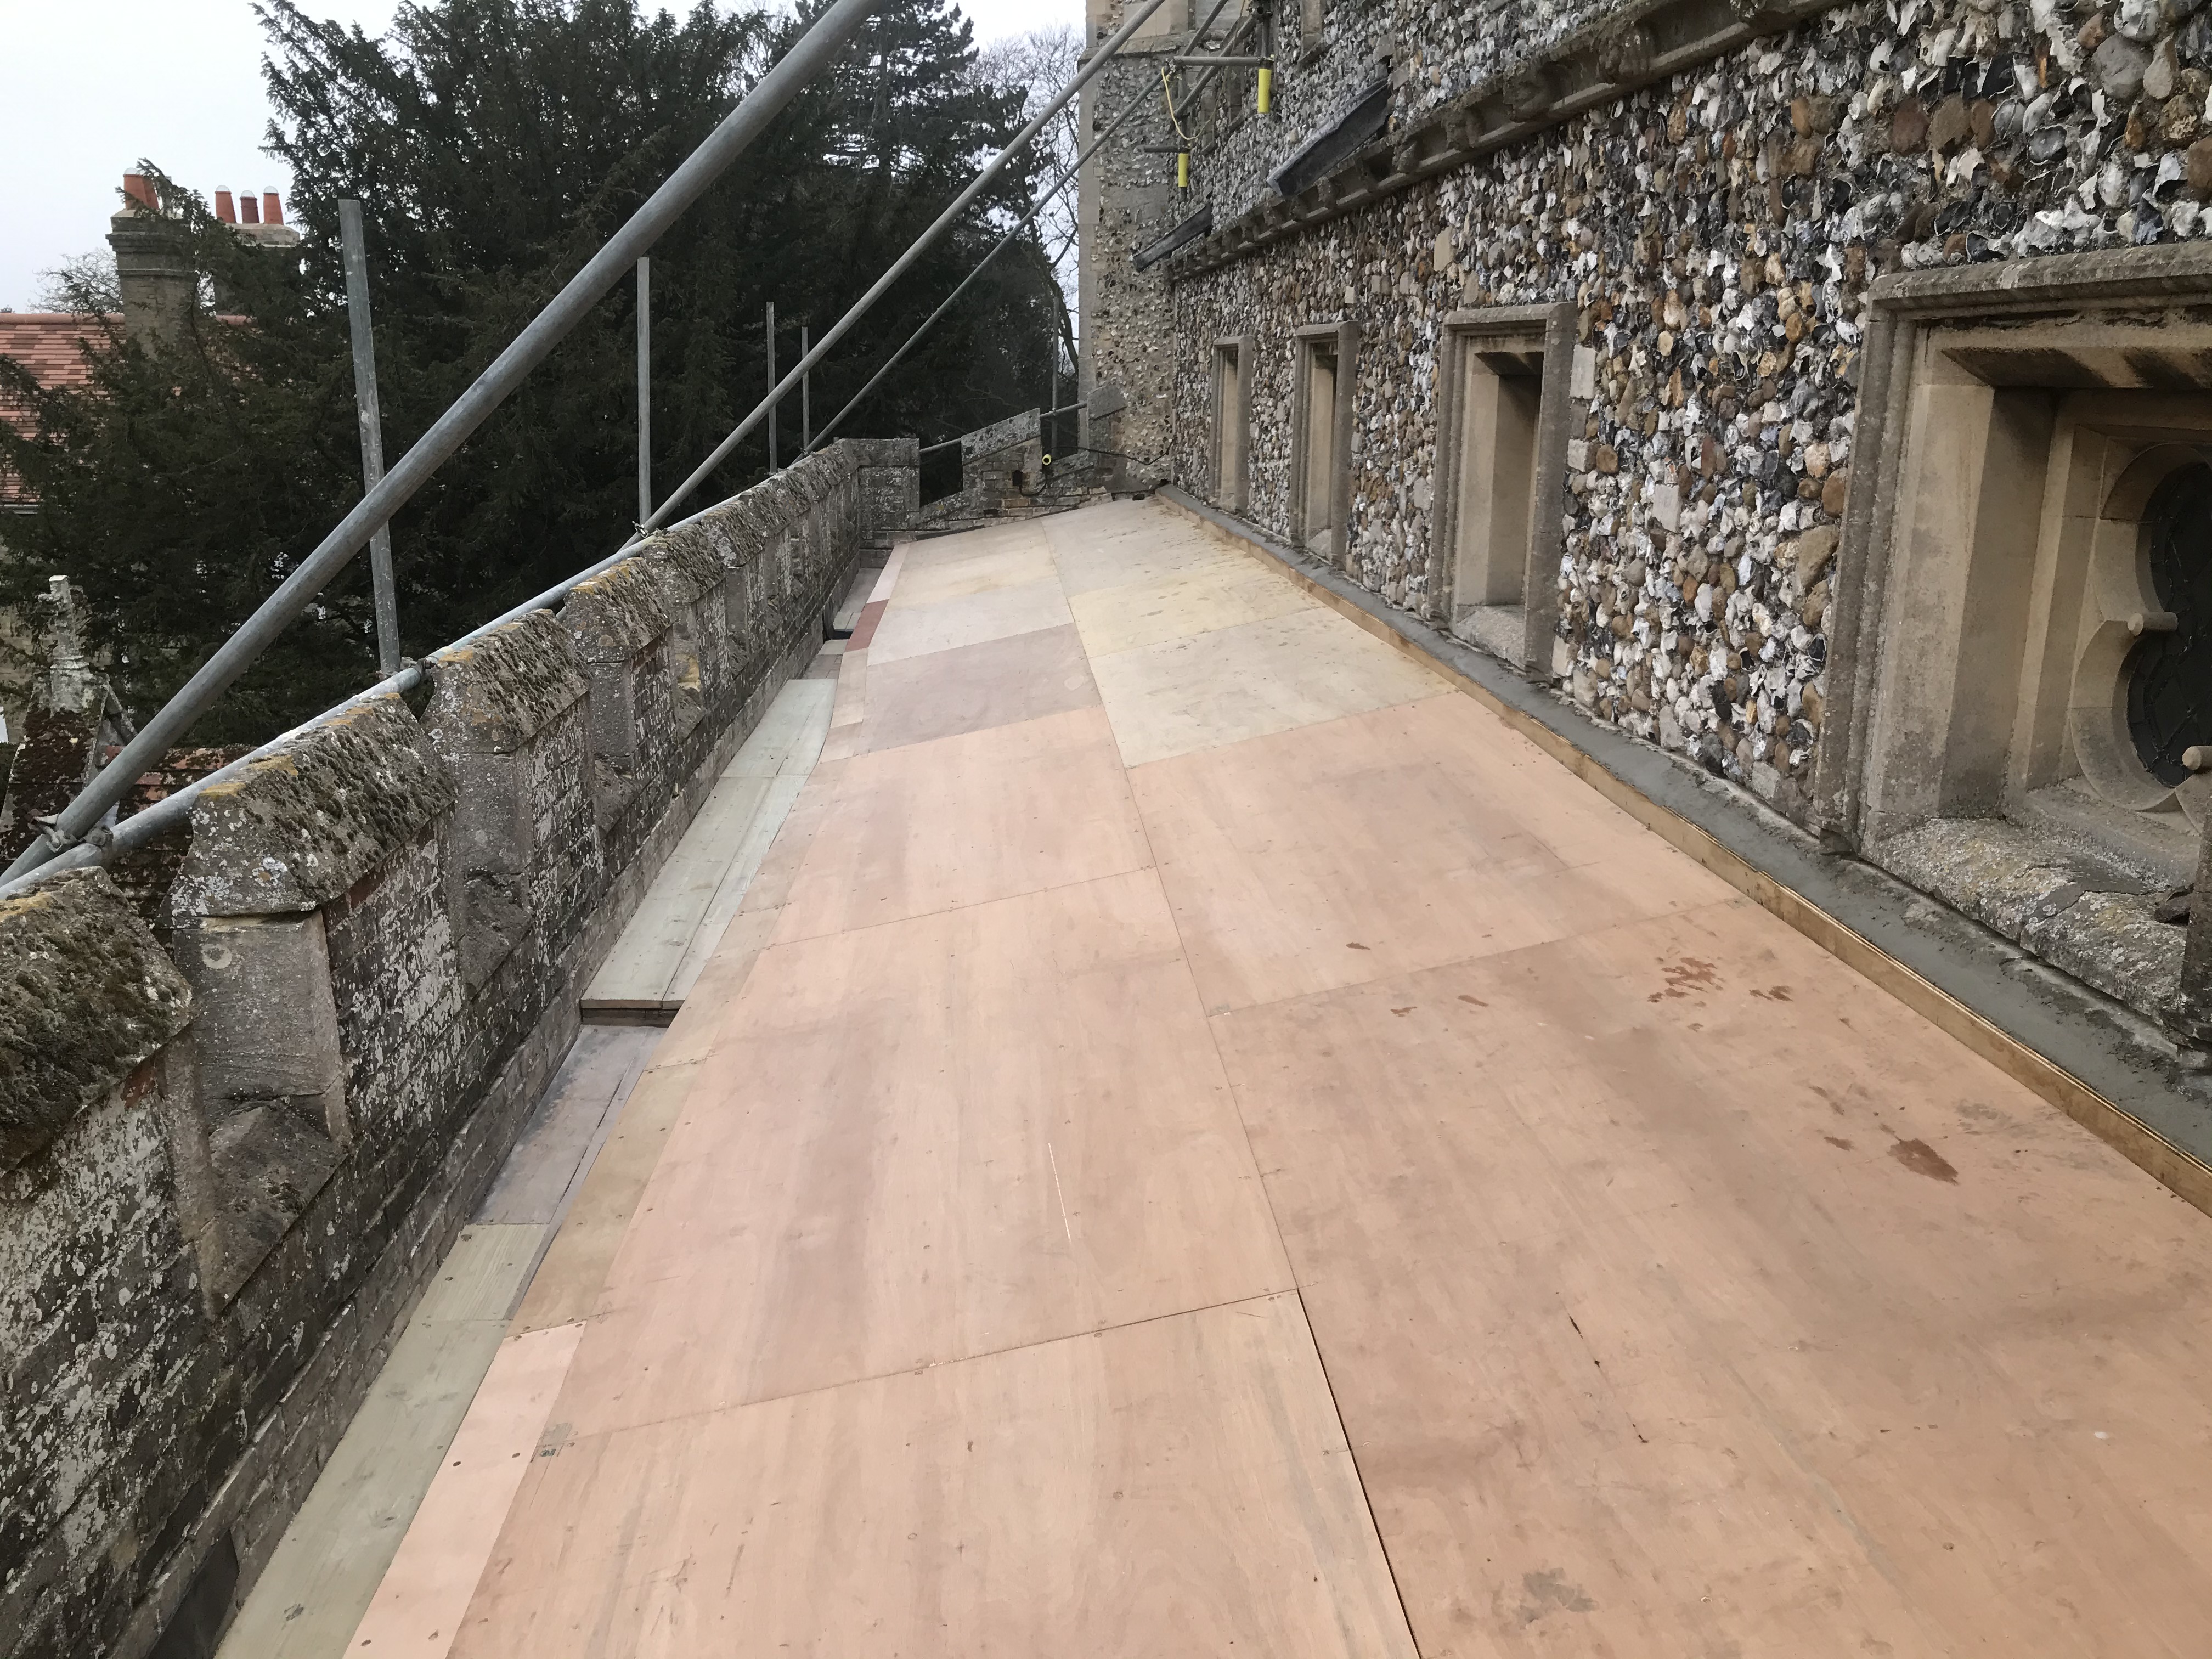 South Aisle looking west new timber deck ready for steel sheeting